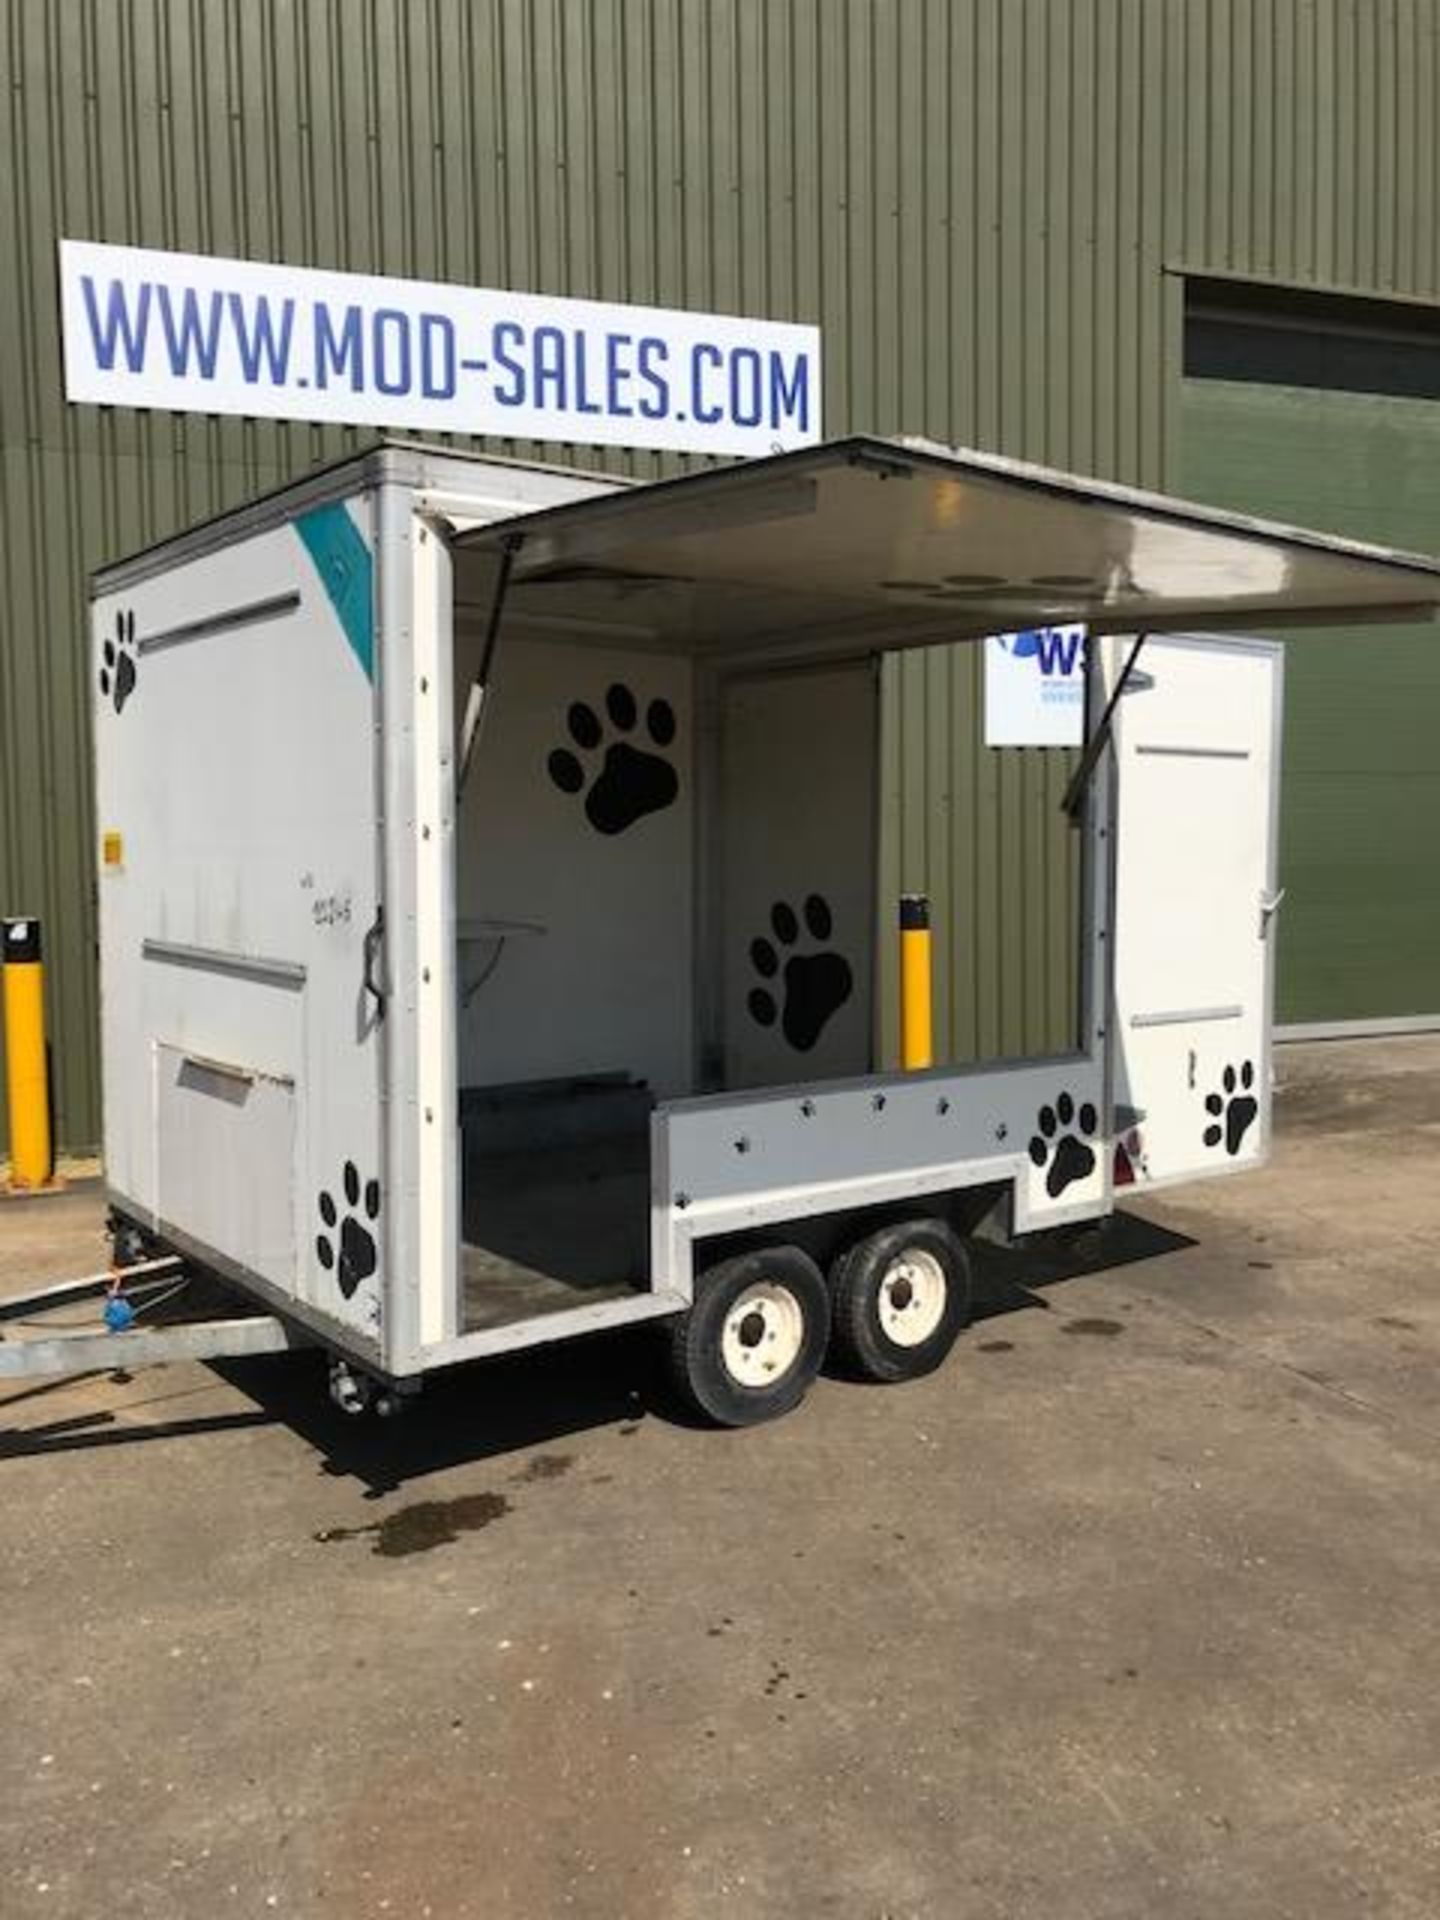 2 Axle Mobile Exhibition Unit with fold out sides - Image 2 of 6